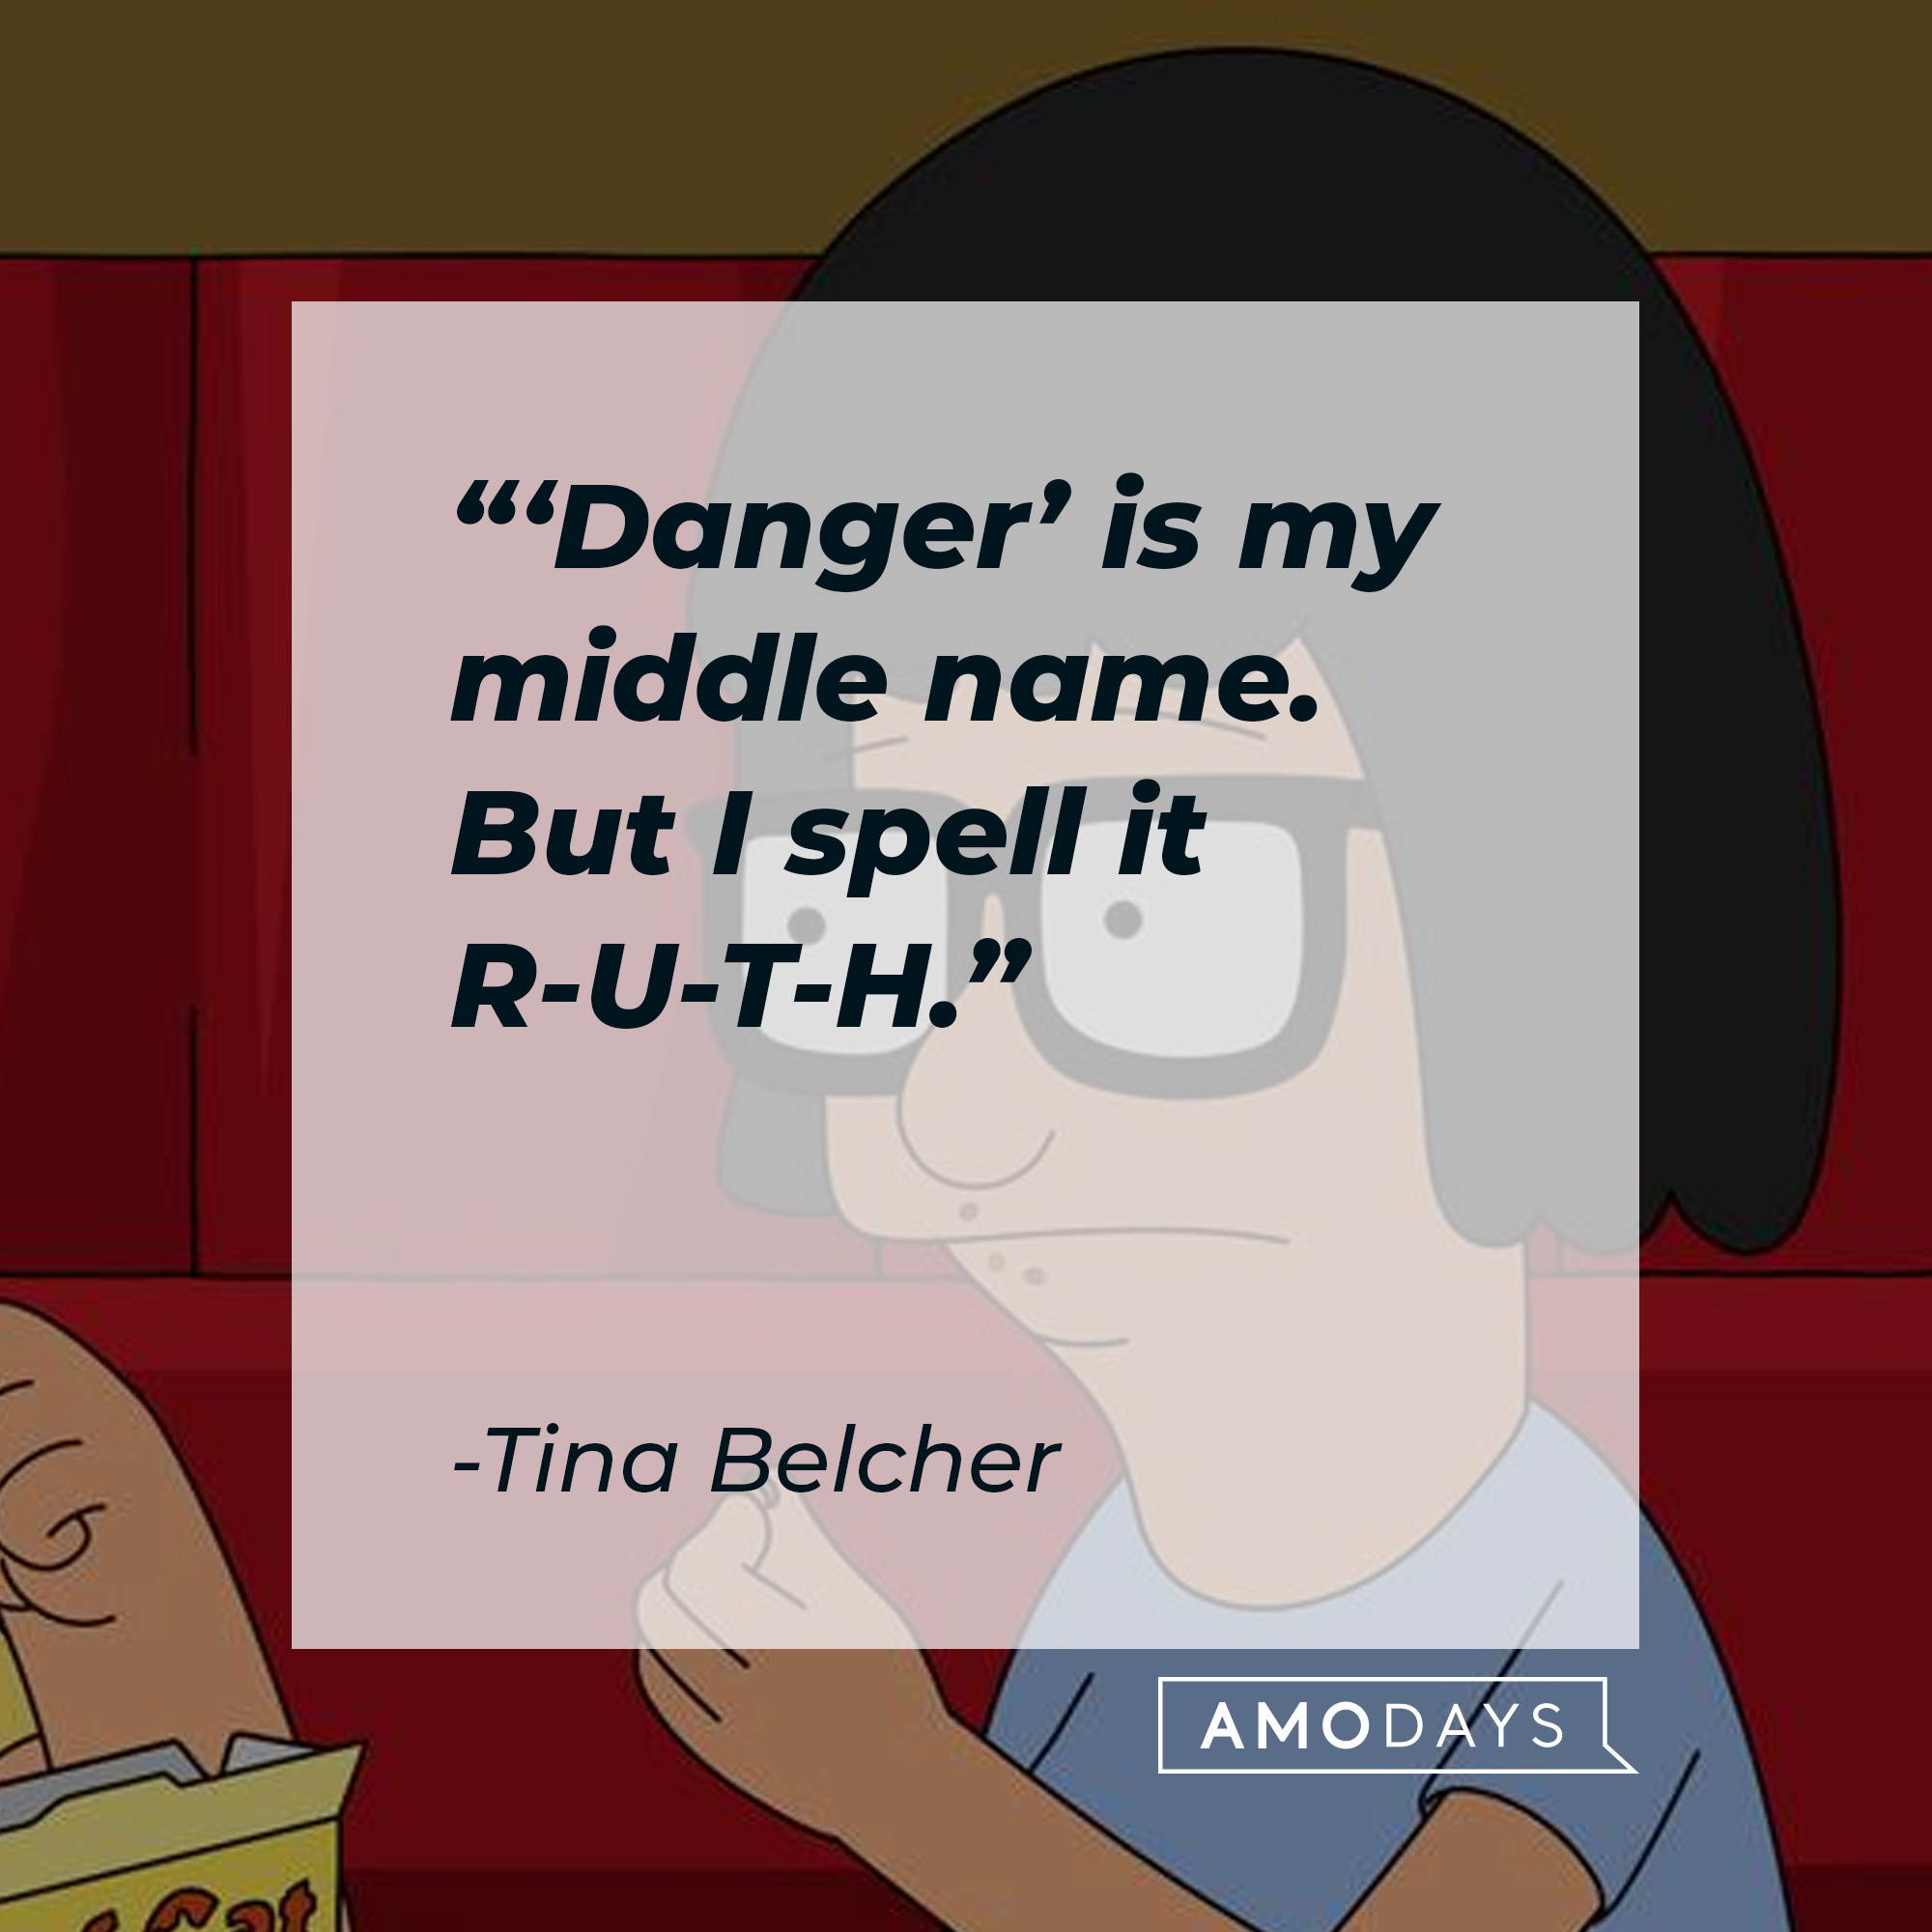 Tina Belcher, with her quote: “‘Danger’ is my middle name. But I spell it R-U-T-H.” | Source: Facebook.com/BobsBurgers